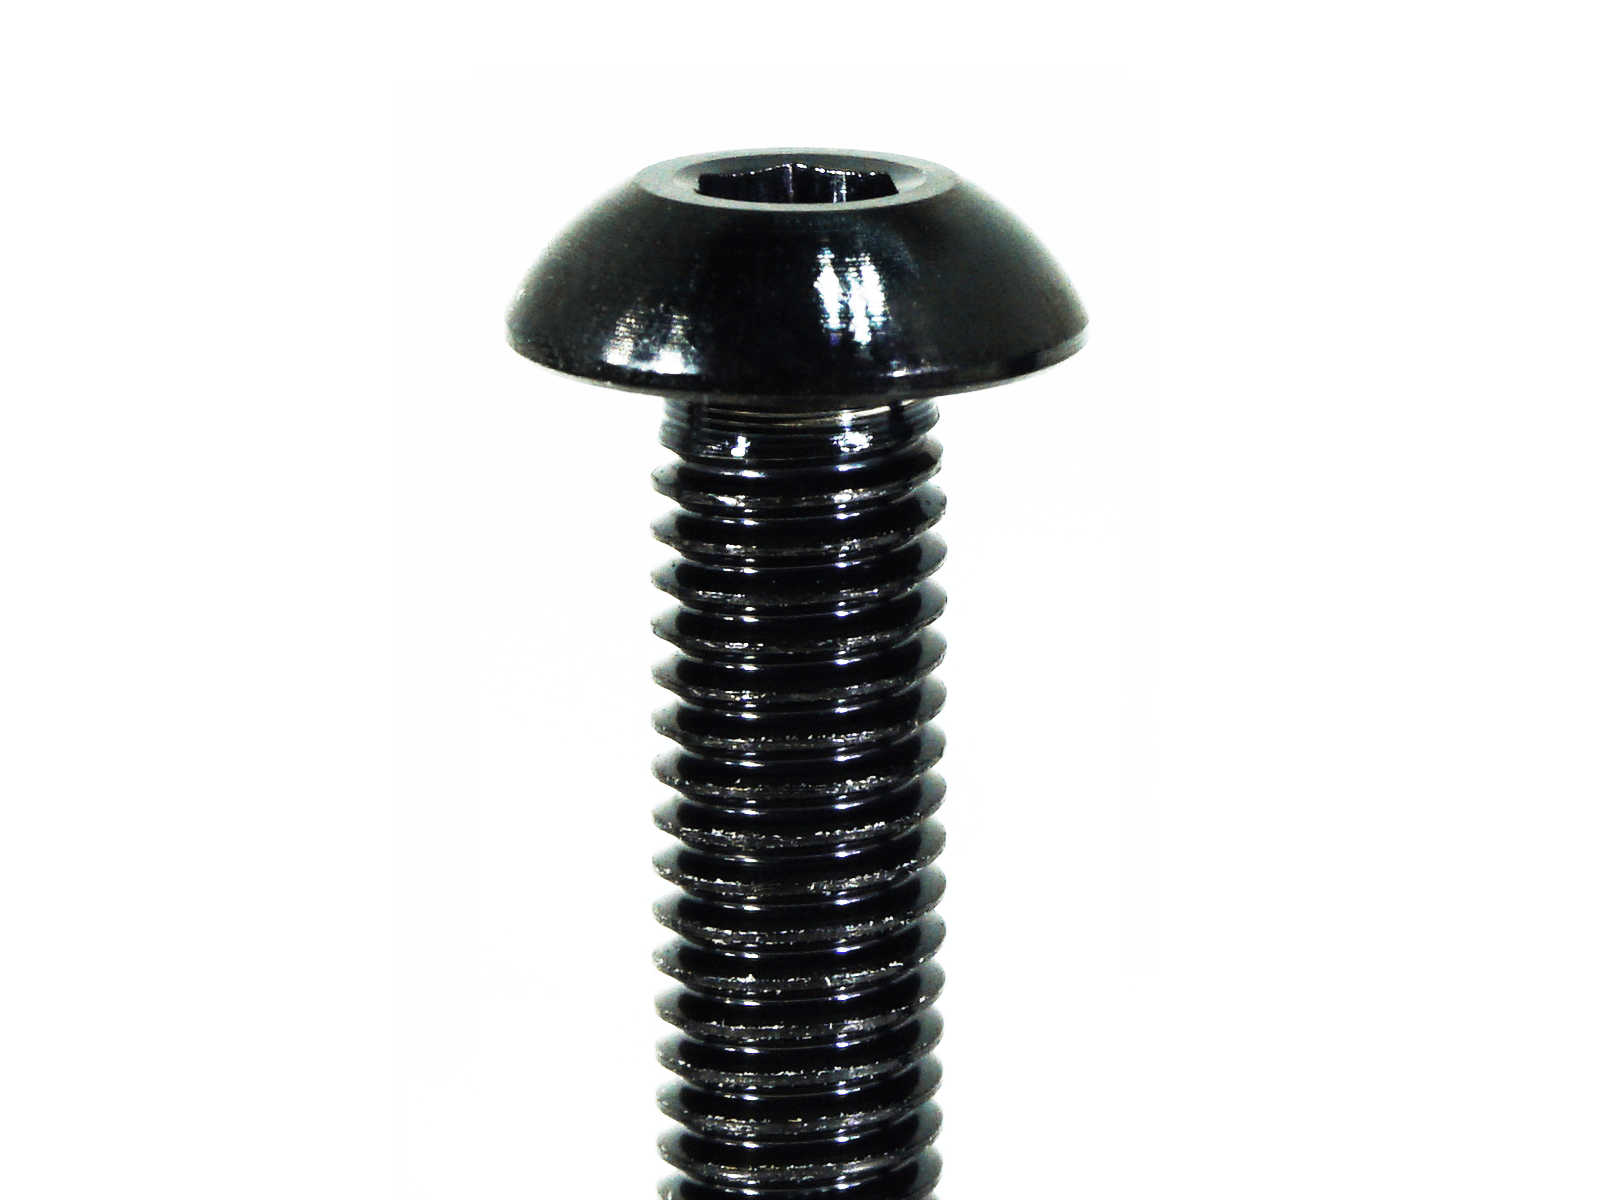 ZSPEC Button-Head Fastener, M5-0.8x20mm, Titanium, Sold per Each Flares, Over Fender, Body Element, Wings, Arches - Titanium / Billet / Stainless - Black, Burned, Gold, Purple, Silver Raw, Polished - Dress Up Bolts Hardware Washers Finish Rocket Bunny Pandem Aimgain twinz carbon signal M5 M6 M8 Wicker Bill